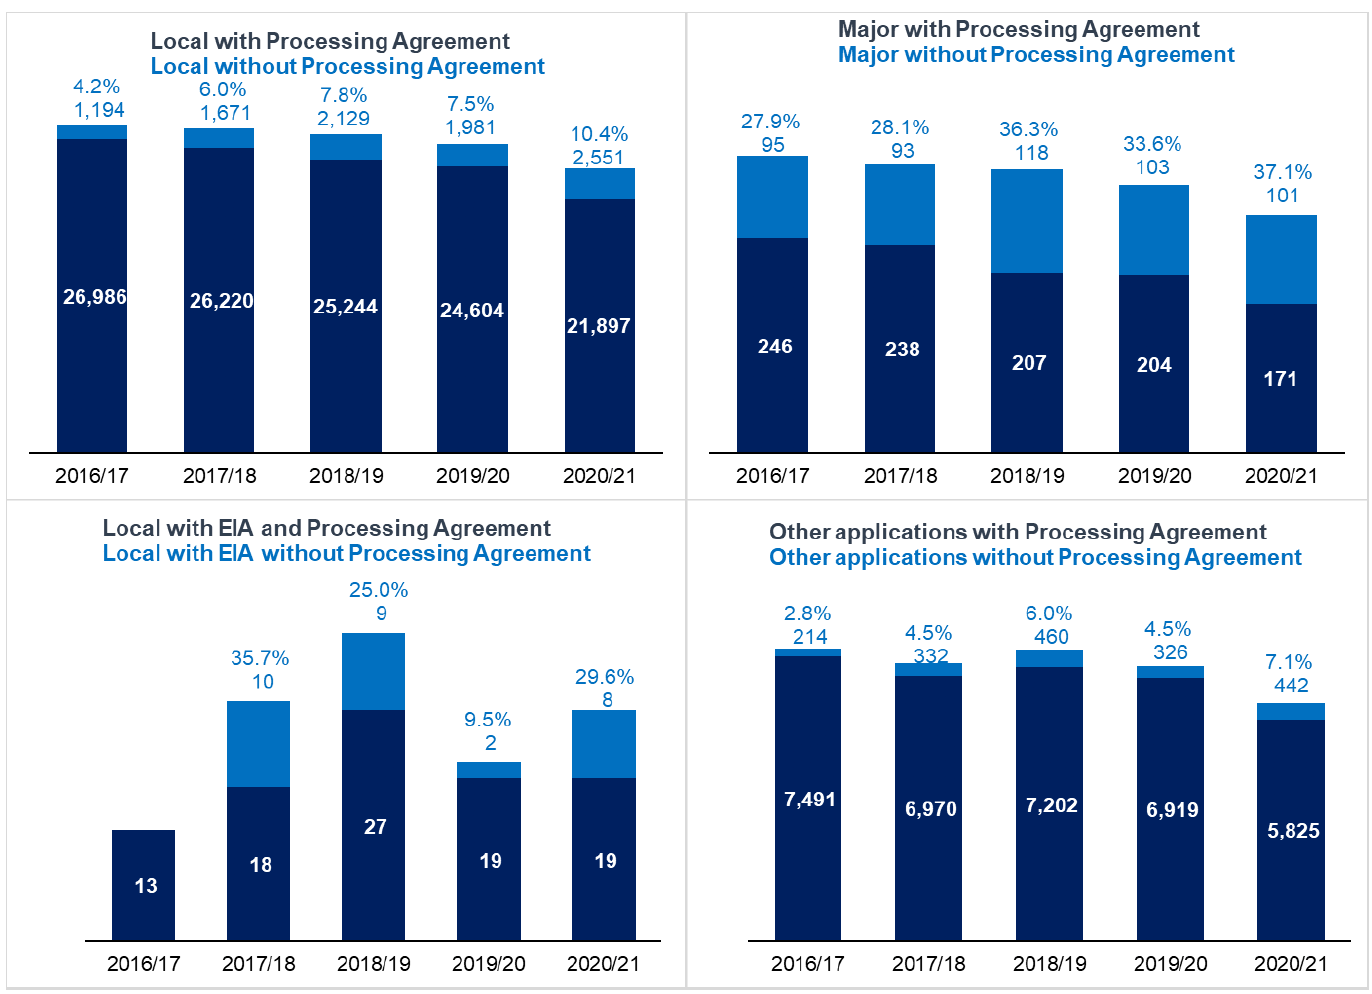 Chart showing annual trends since 2015/16 in proportion of applications subject to processing agreements